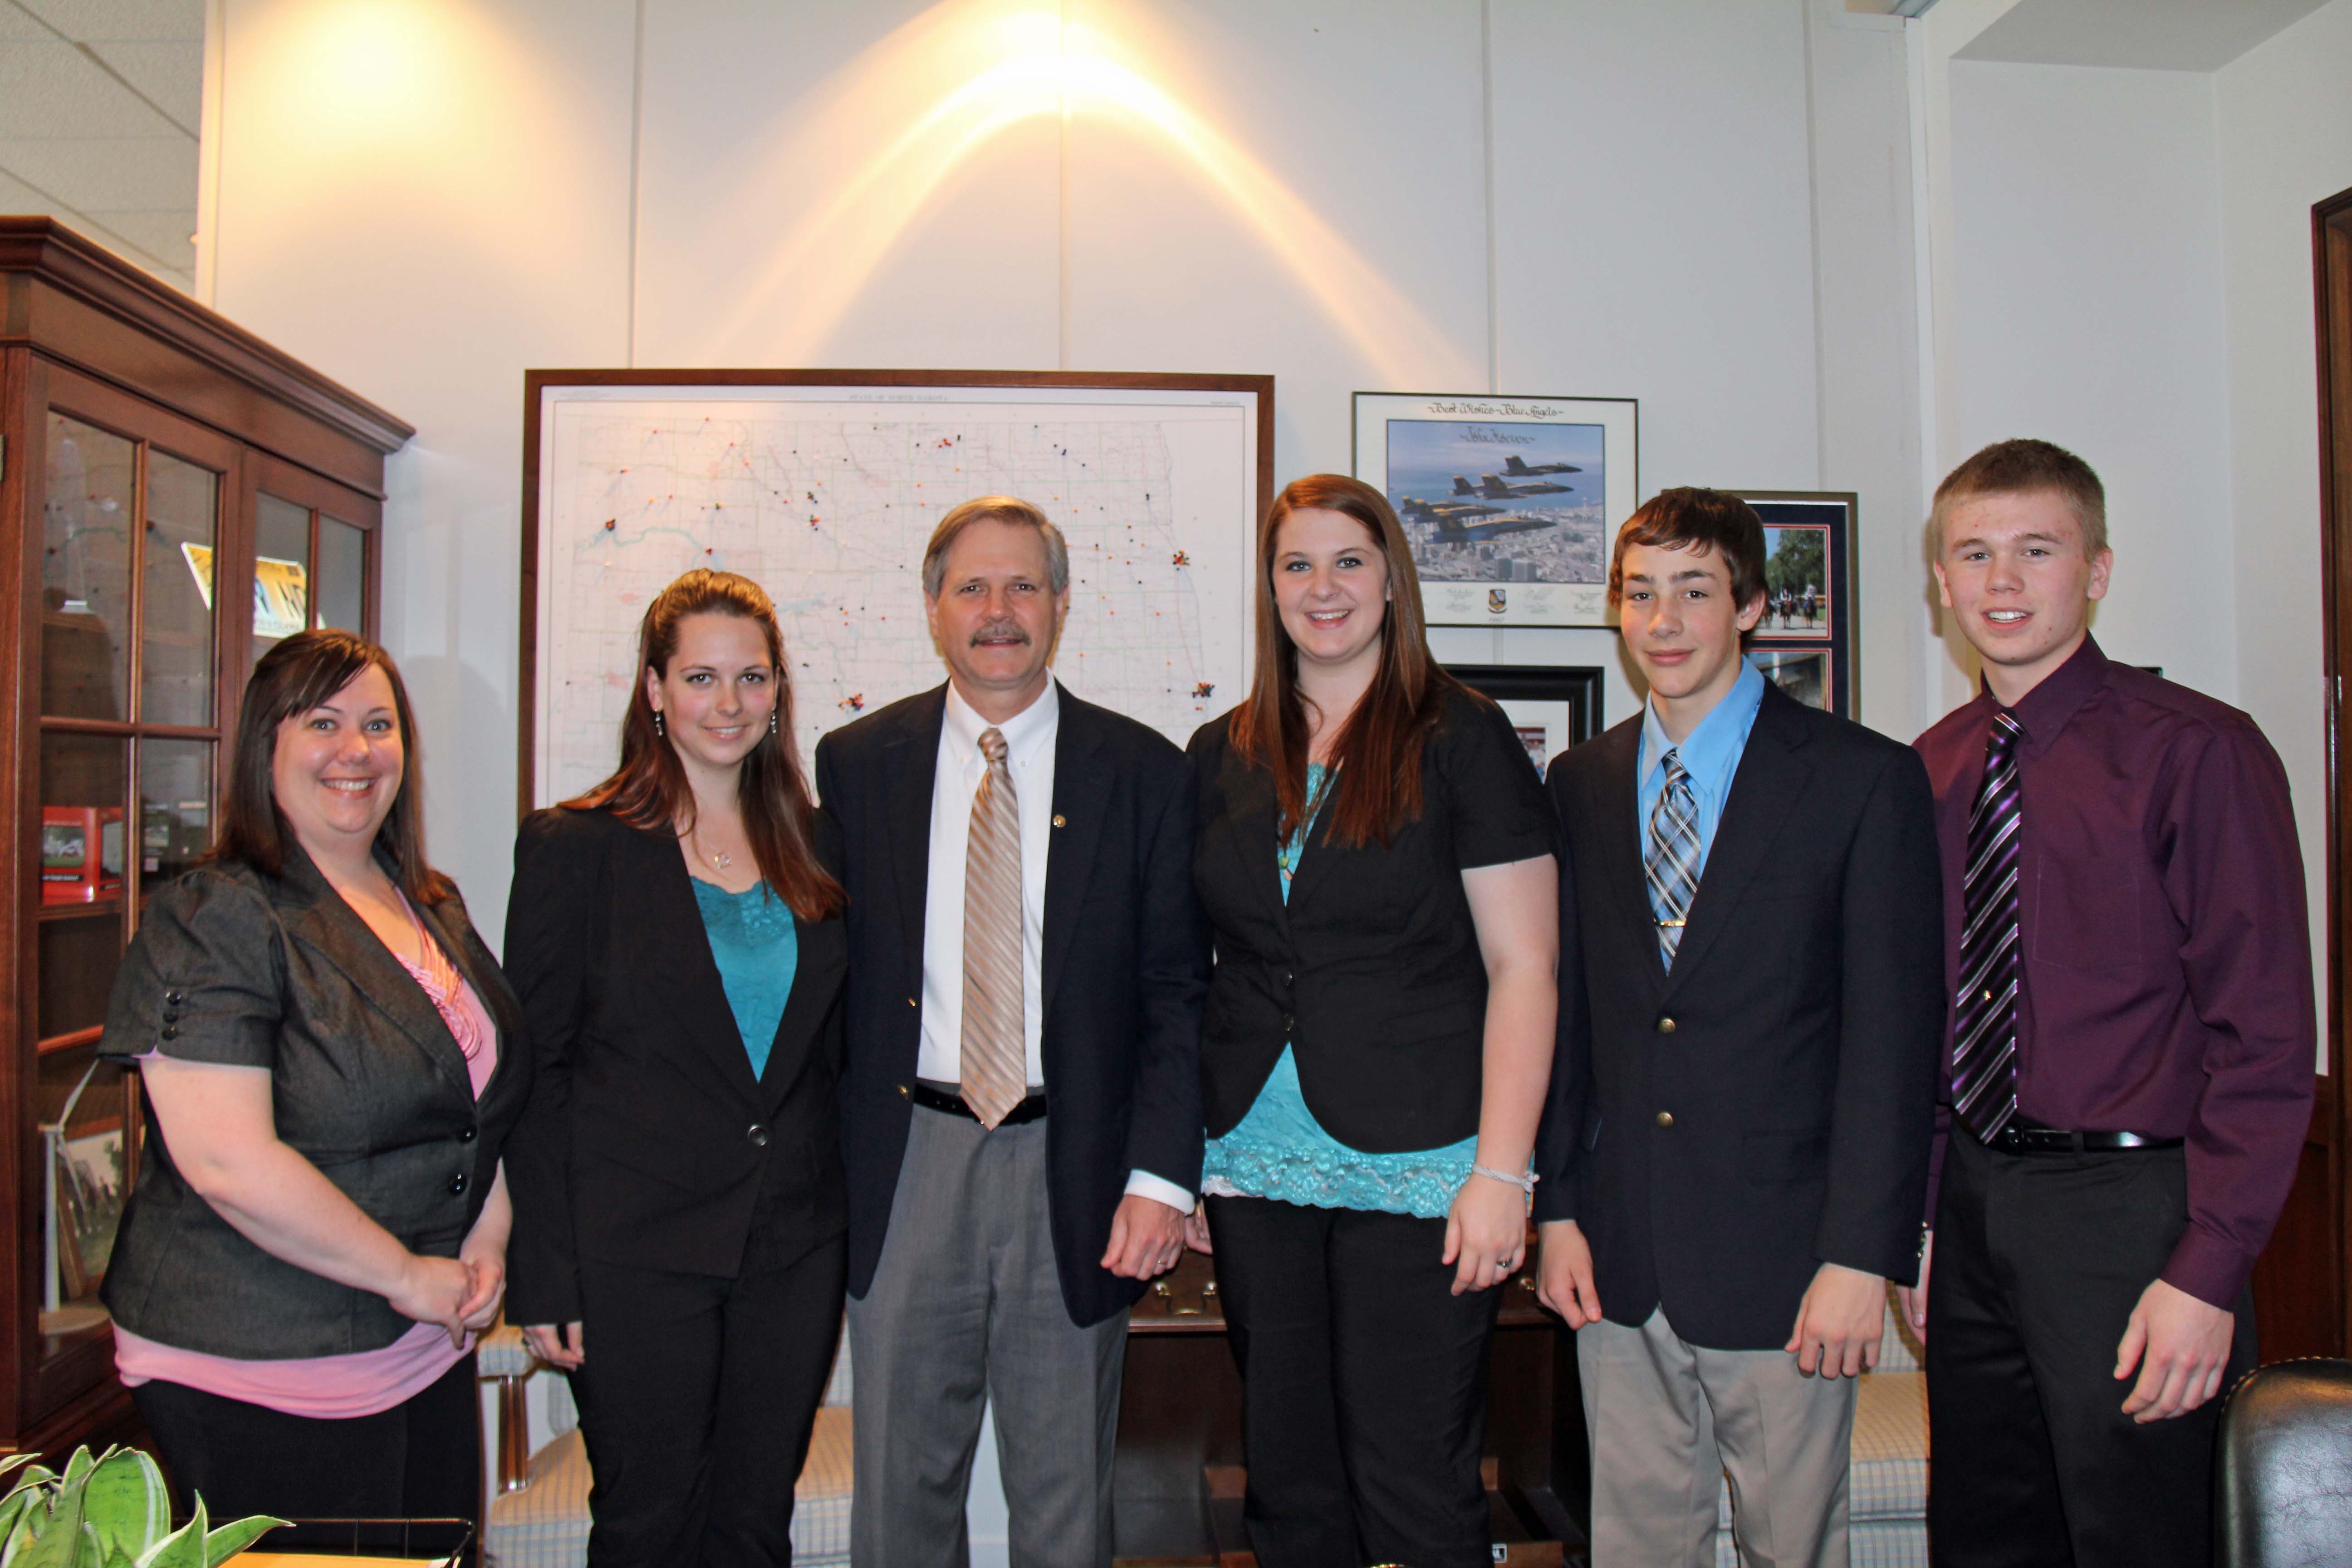 North Dakota's delegates to the National 4-H Conference meet with U.S. Sen. John Hoeven, R-N.D. Pictured are, from left to right: NDSU 4-H youth development specialist Katie Tyler, conference delegate Deann Berntson, Hoeven, and conference delegates Bobbi Jo Kronberg, Colby Hennessy and Justin Zahradka.